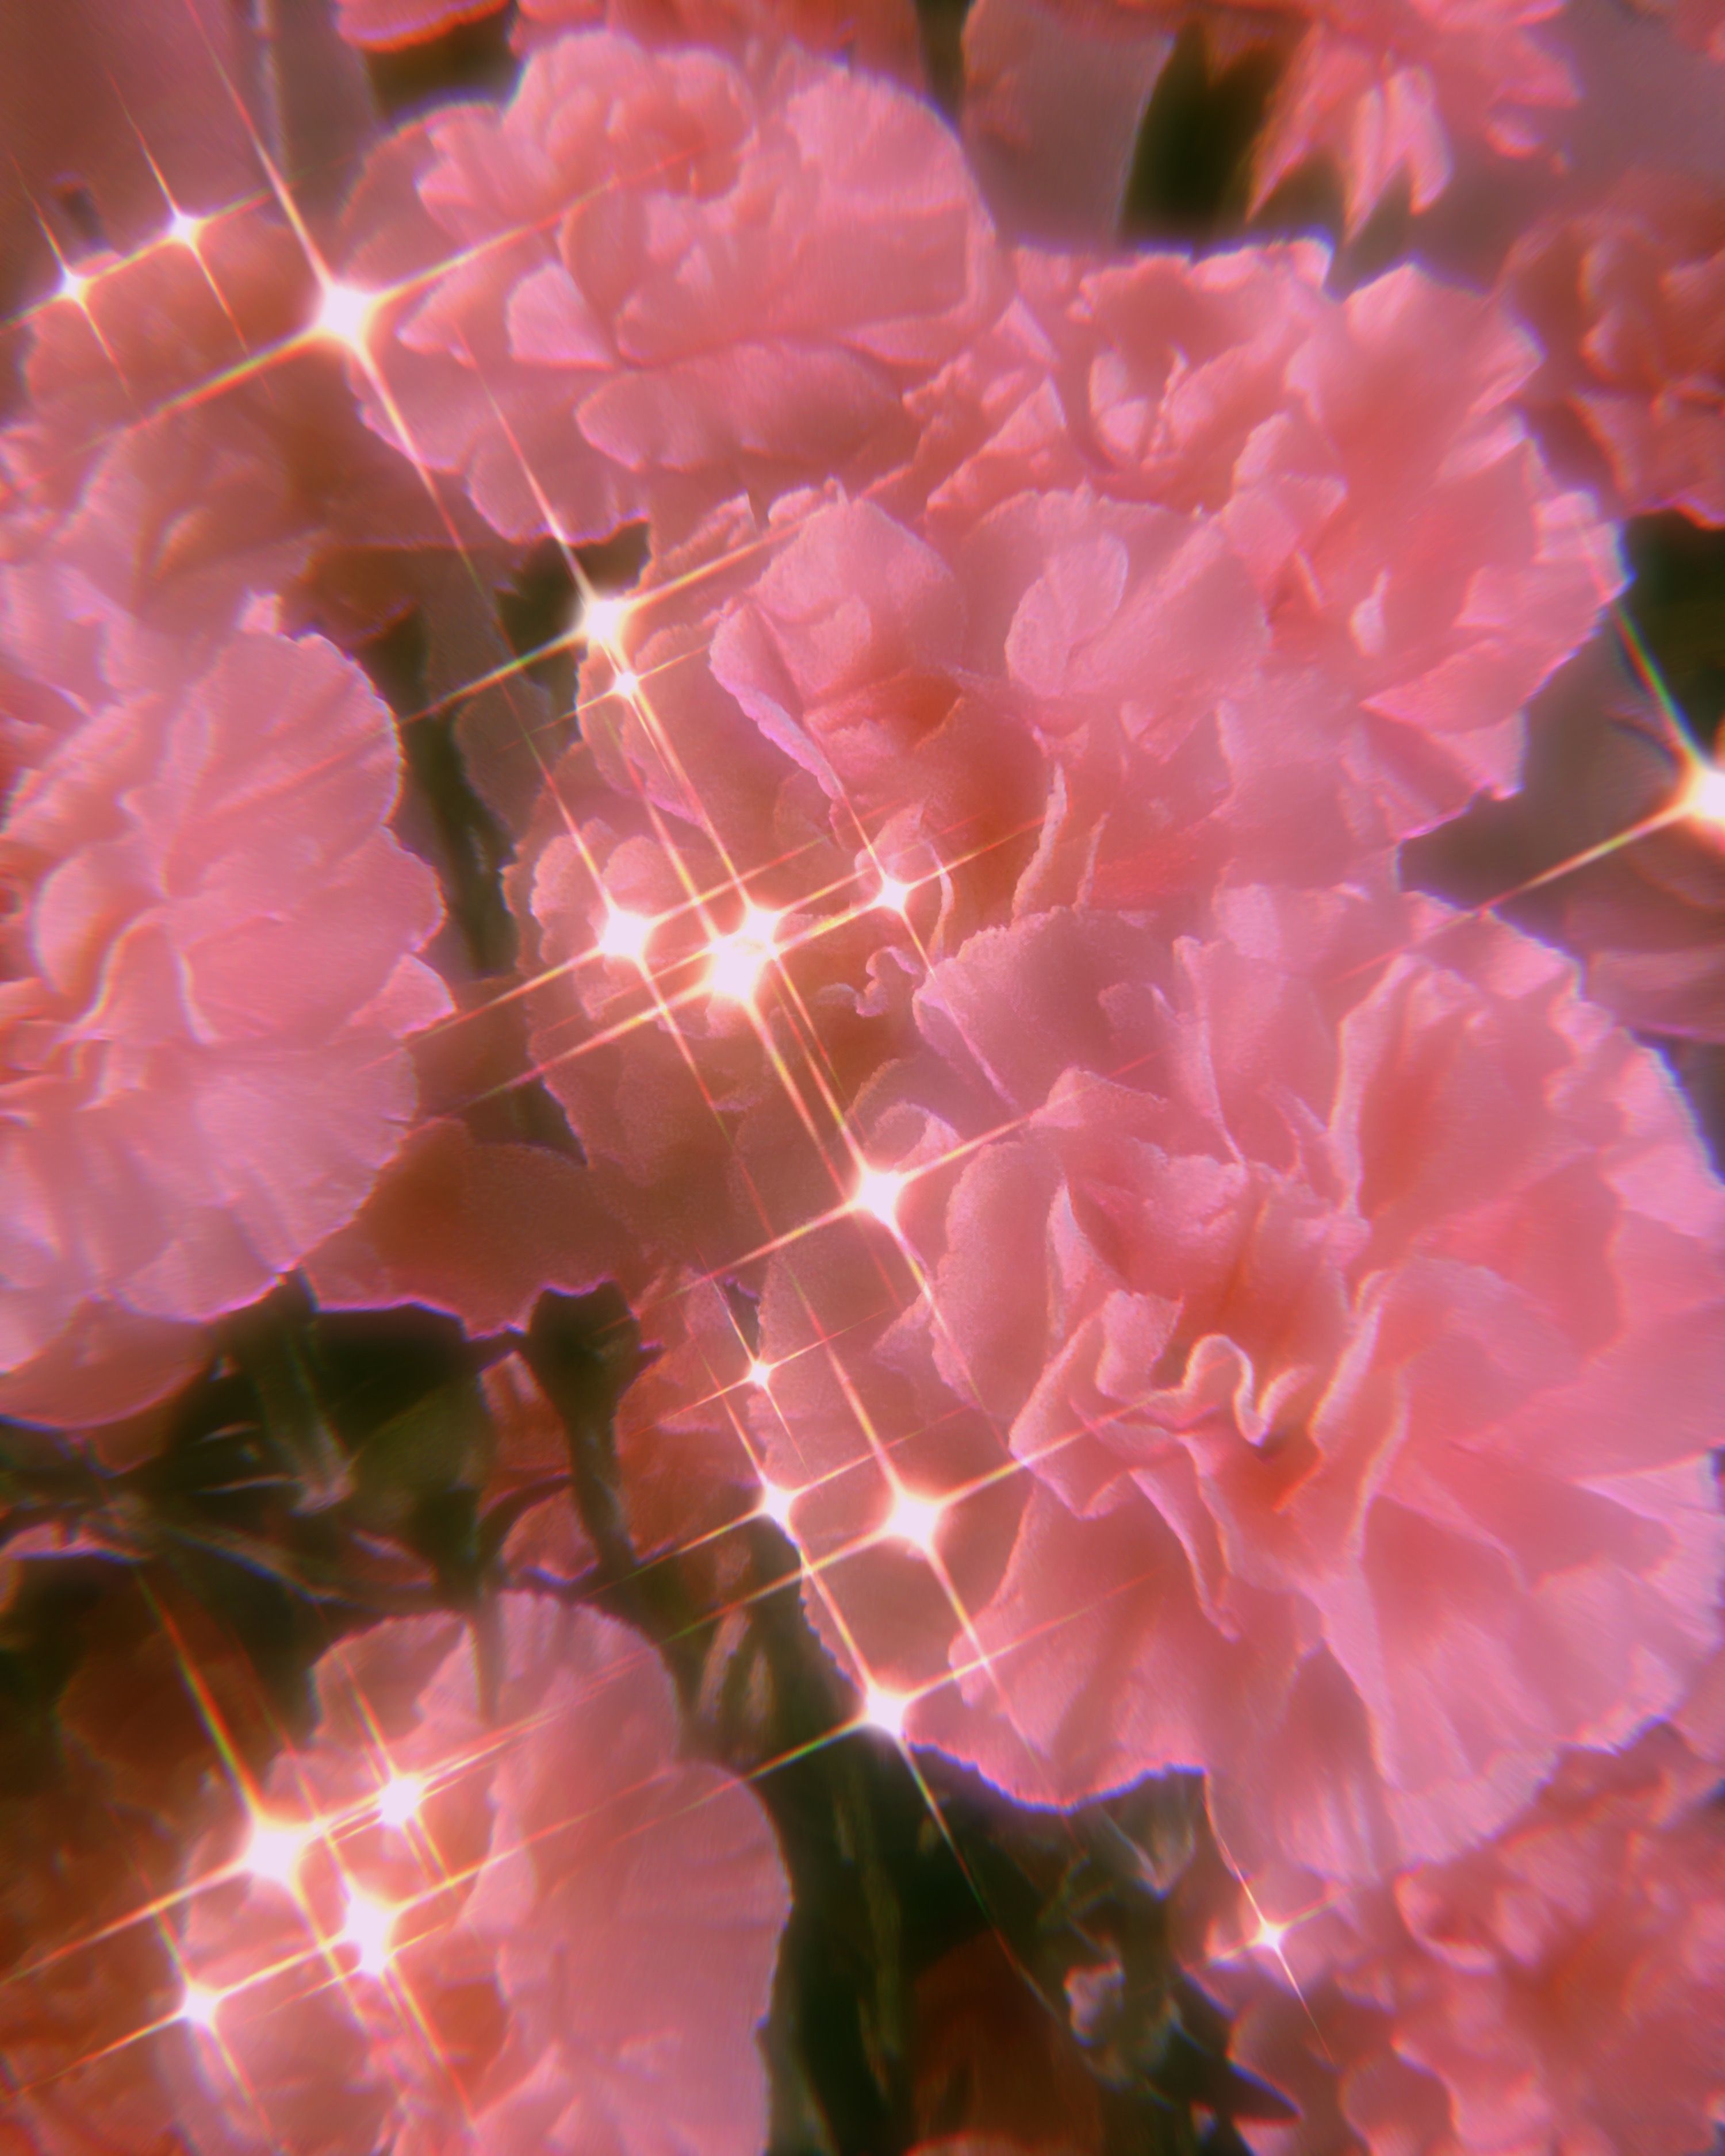 Pink Flowers Aesthetic Wallpapers